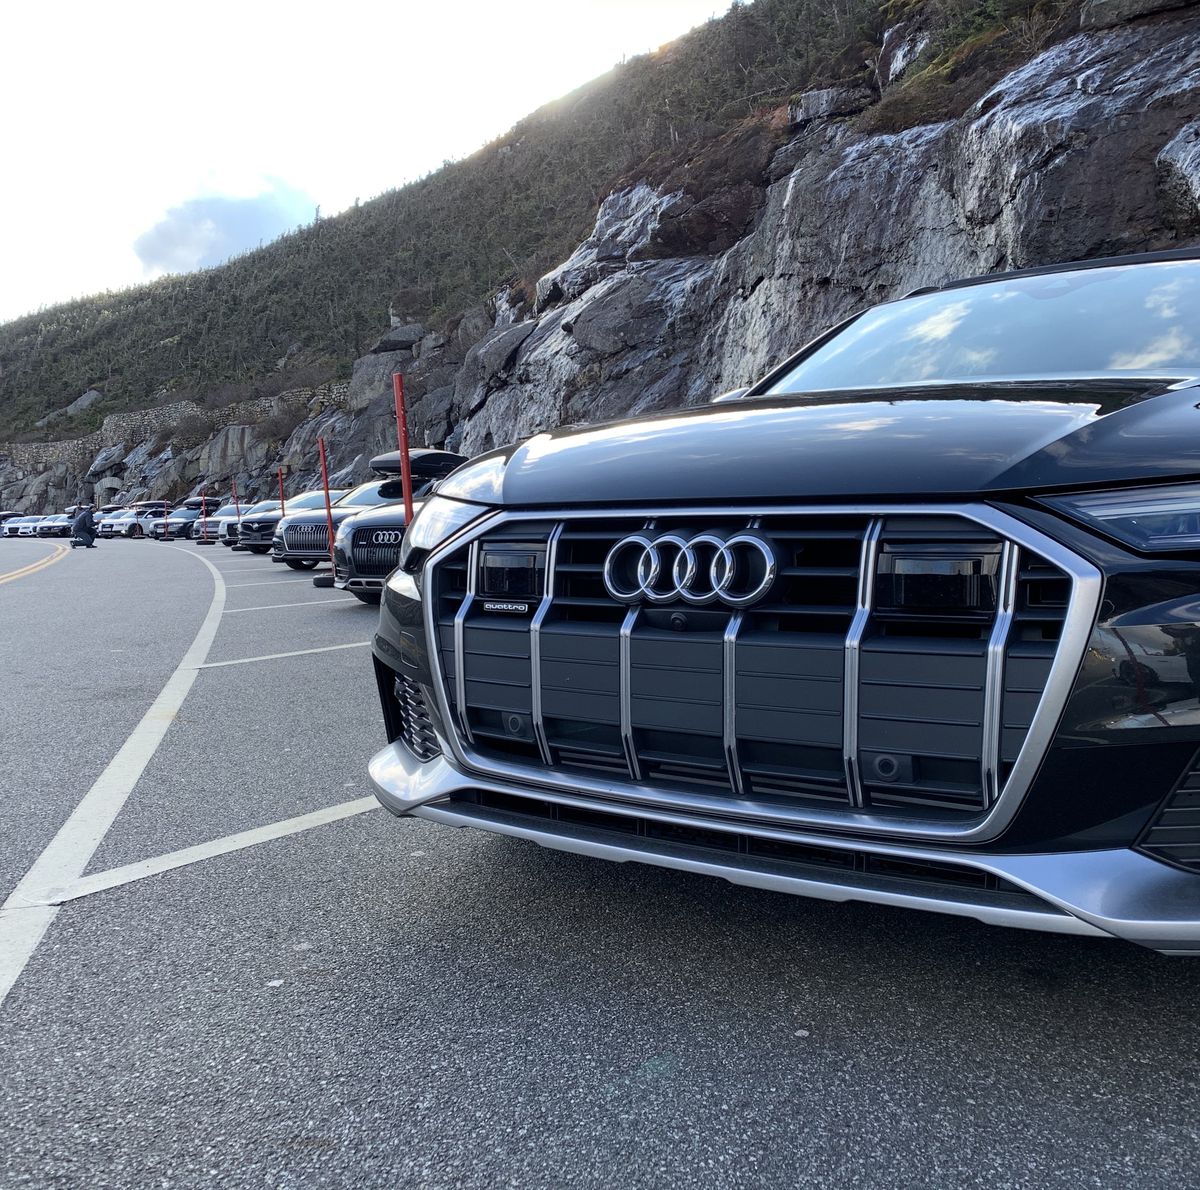 Audi A6 Allroad Lives Up to the Cult Following